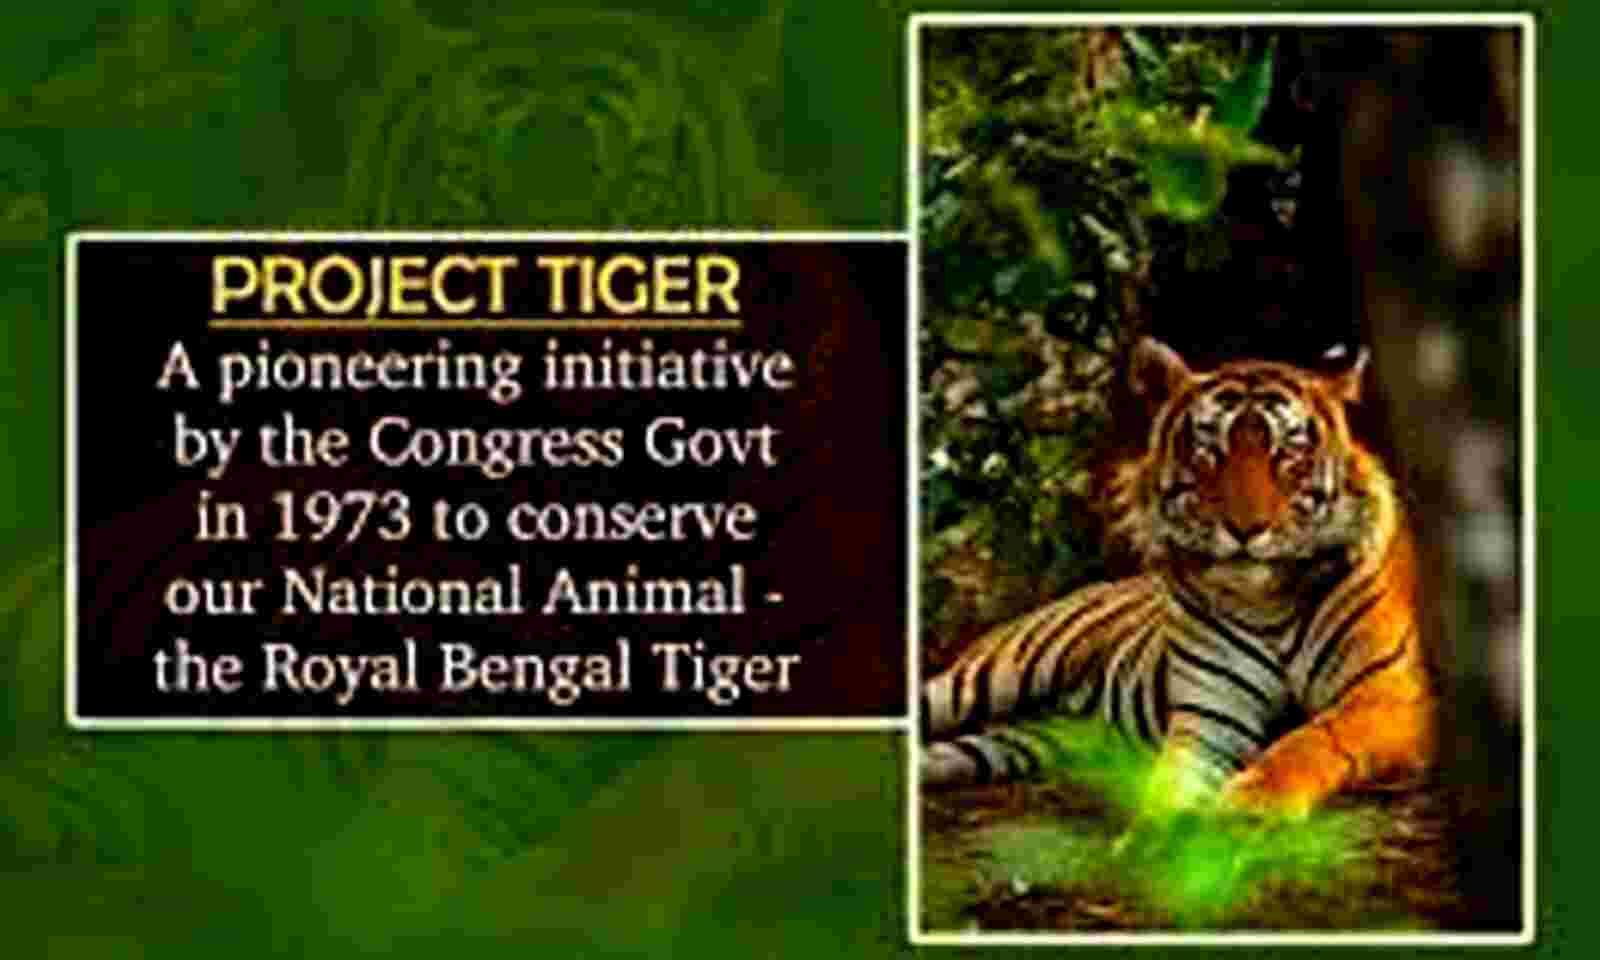 Project Tiger in India